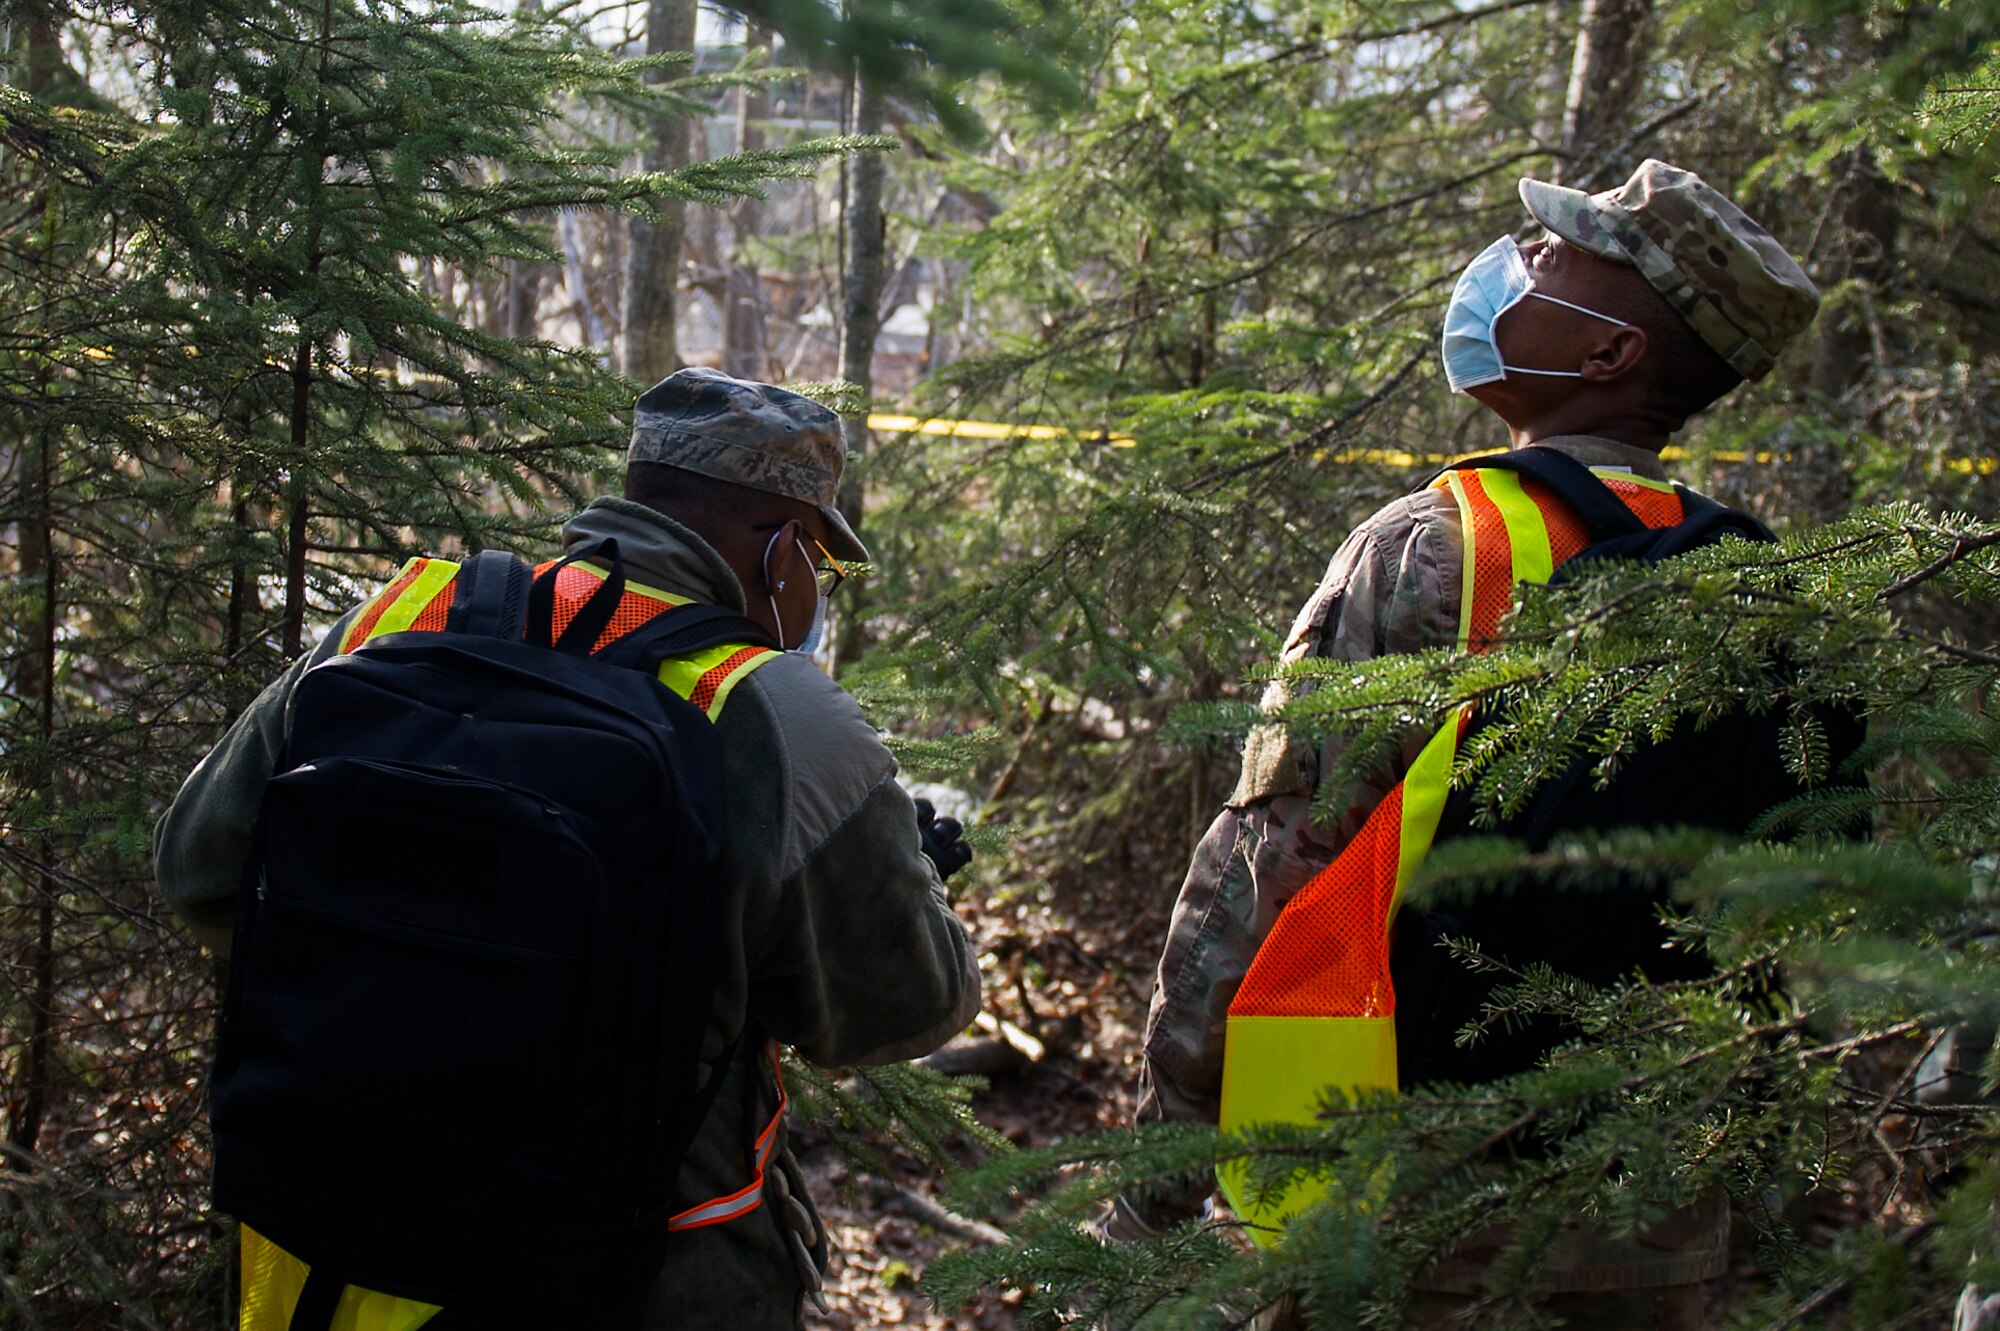 U.S. Air Force Senior Airman Jeremy Bennett with the 673d Force Support Squadron scans the trees during a search and recovery mission for mortuary affairs training during Polar Force 19-4 at Joint Base Elmendorf-Richardson, Alaska, April 2, 2019. Polar Force is a two-week exercise designed to test JBER’s mission readiness, and strengthen and develop the skills service members require when facing adverse situations.